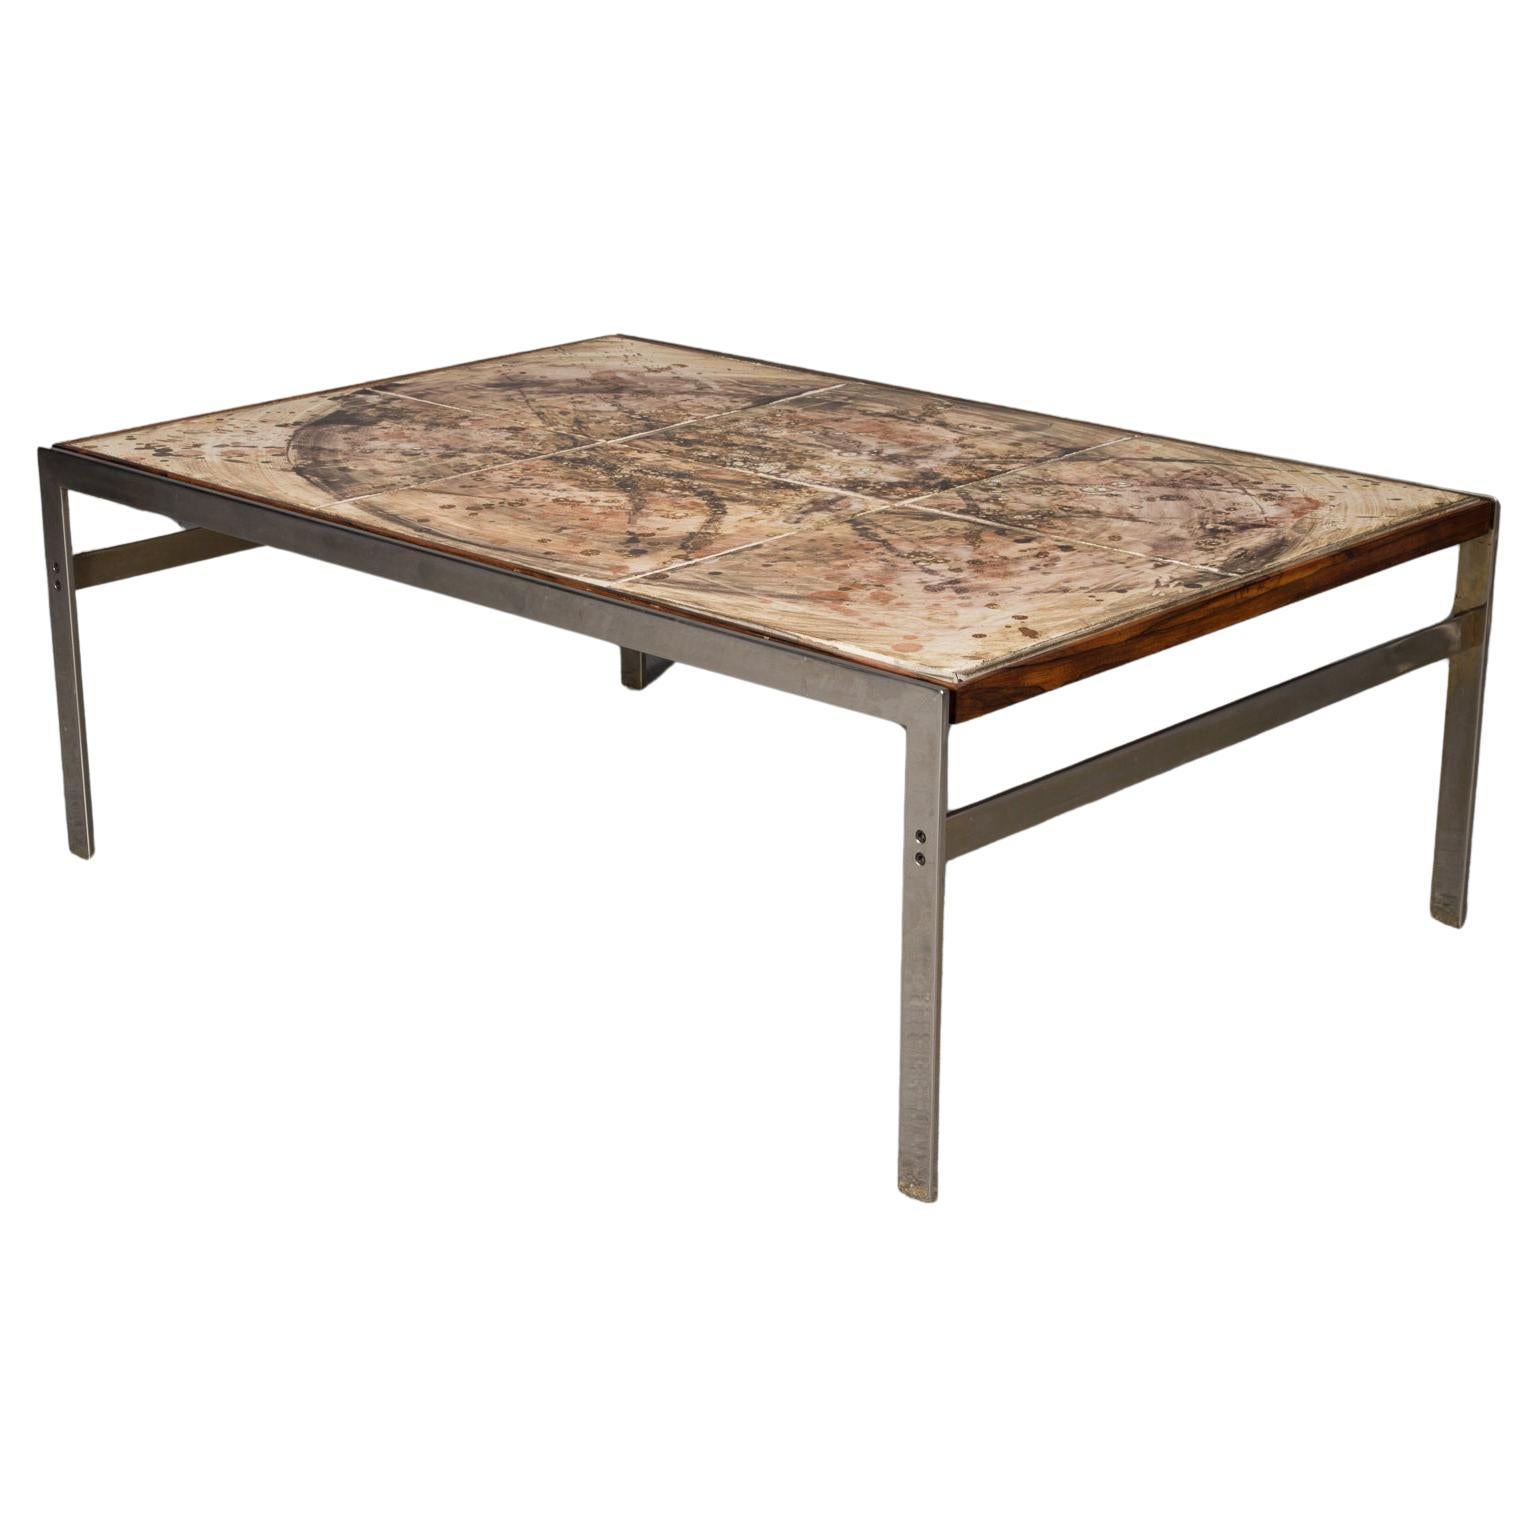 Hand-Painted Tile Coffee Table with Rosewood and Chrome Frame